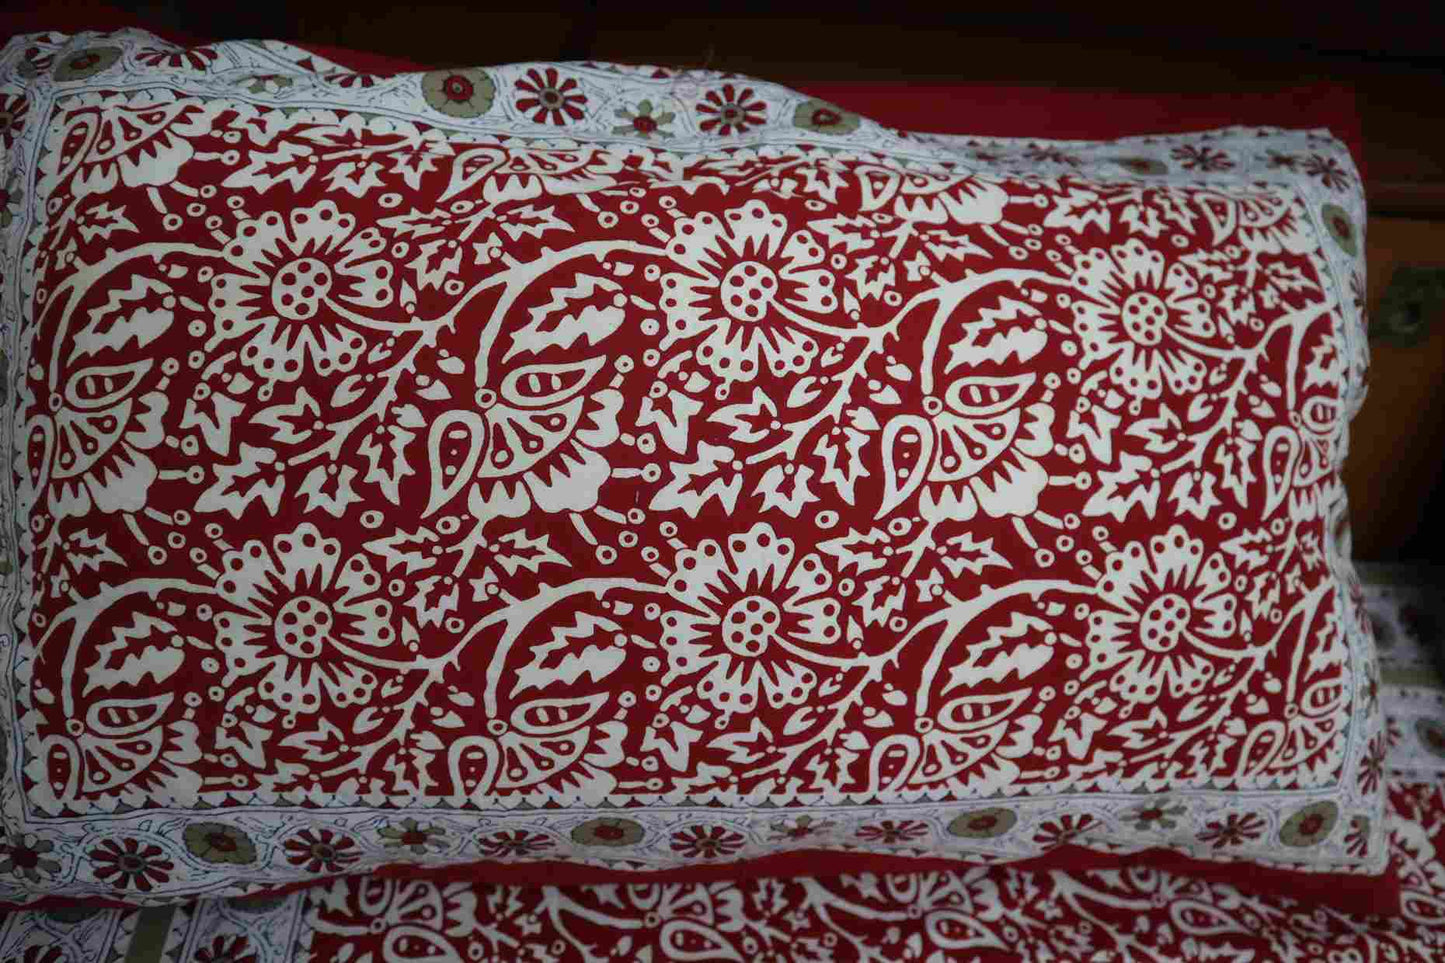 Red Jaal Pure Cotton Jaipuri Bedsheets for Double Bed with Pillow Covers, 90" x 108" King Size, 180 TC, Breathable and Skin Friendly